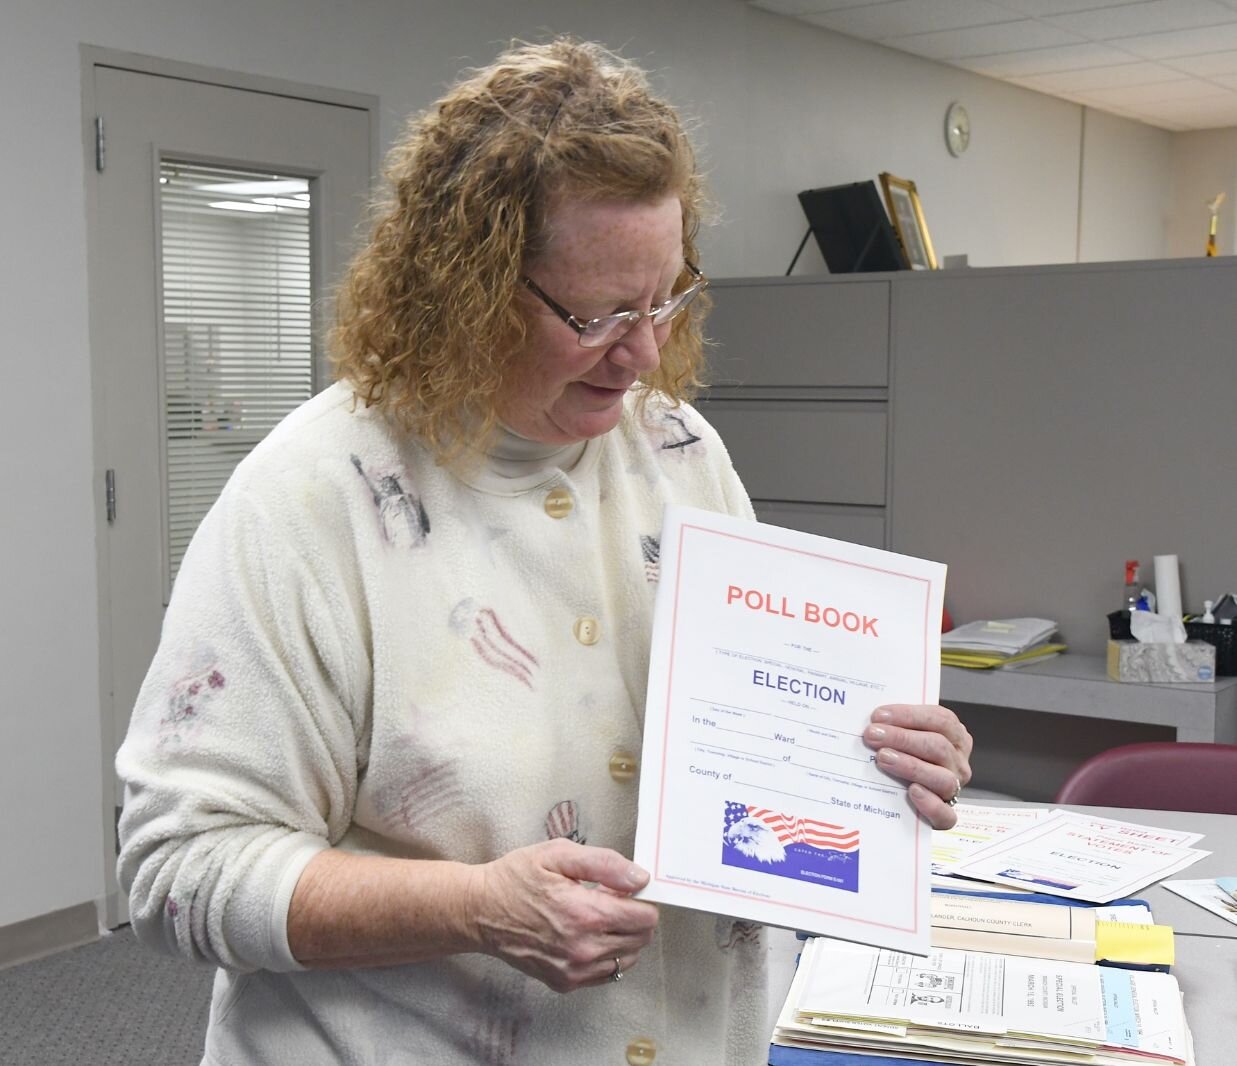 Teri Loew, Chief Deputy Clerk of Elections for Calhoun County, holds up a polling book.